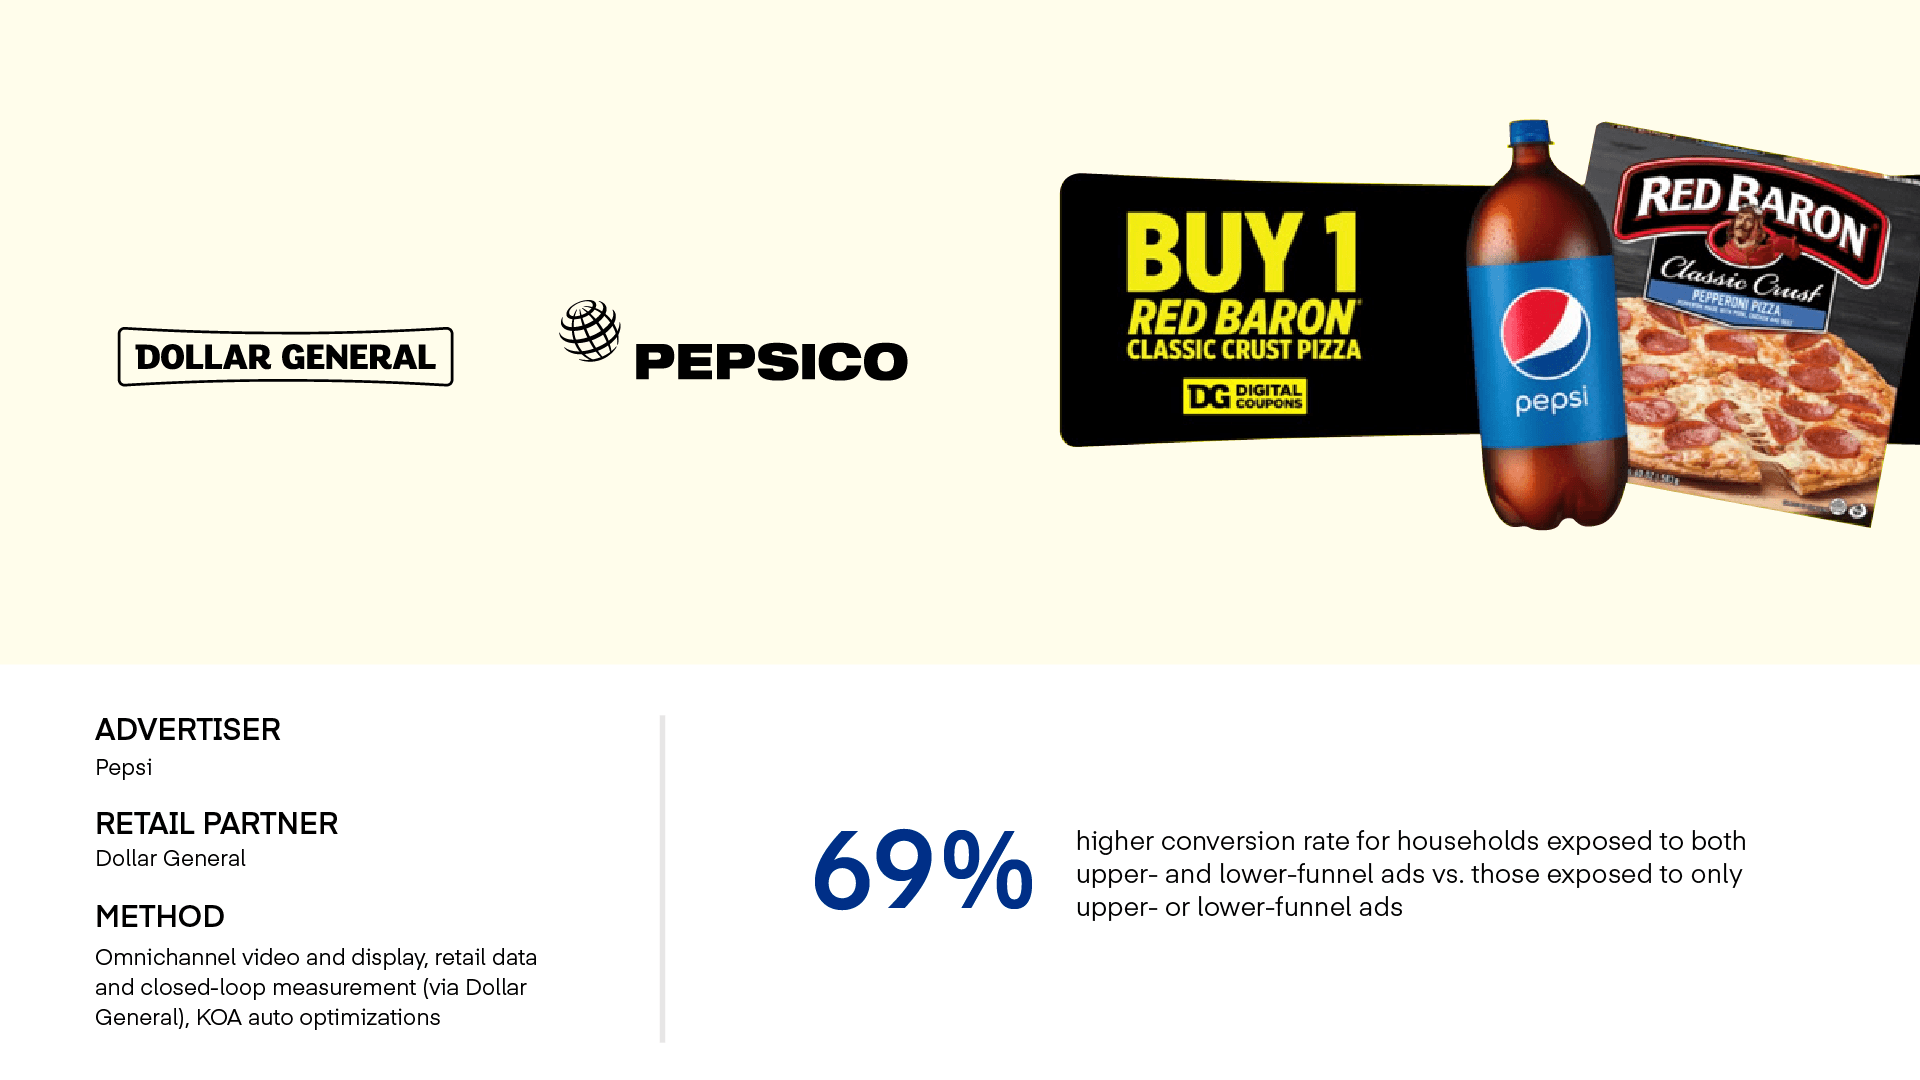 PepsiCo + Dollar General case study results: 69% higher conversion rate for households exposed to both upper- and lower-funnel ads vs. those exposed to only upper- or lower-funnel ads.